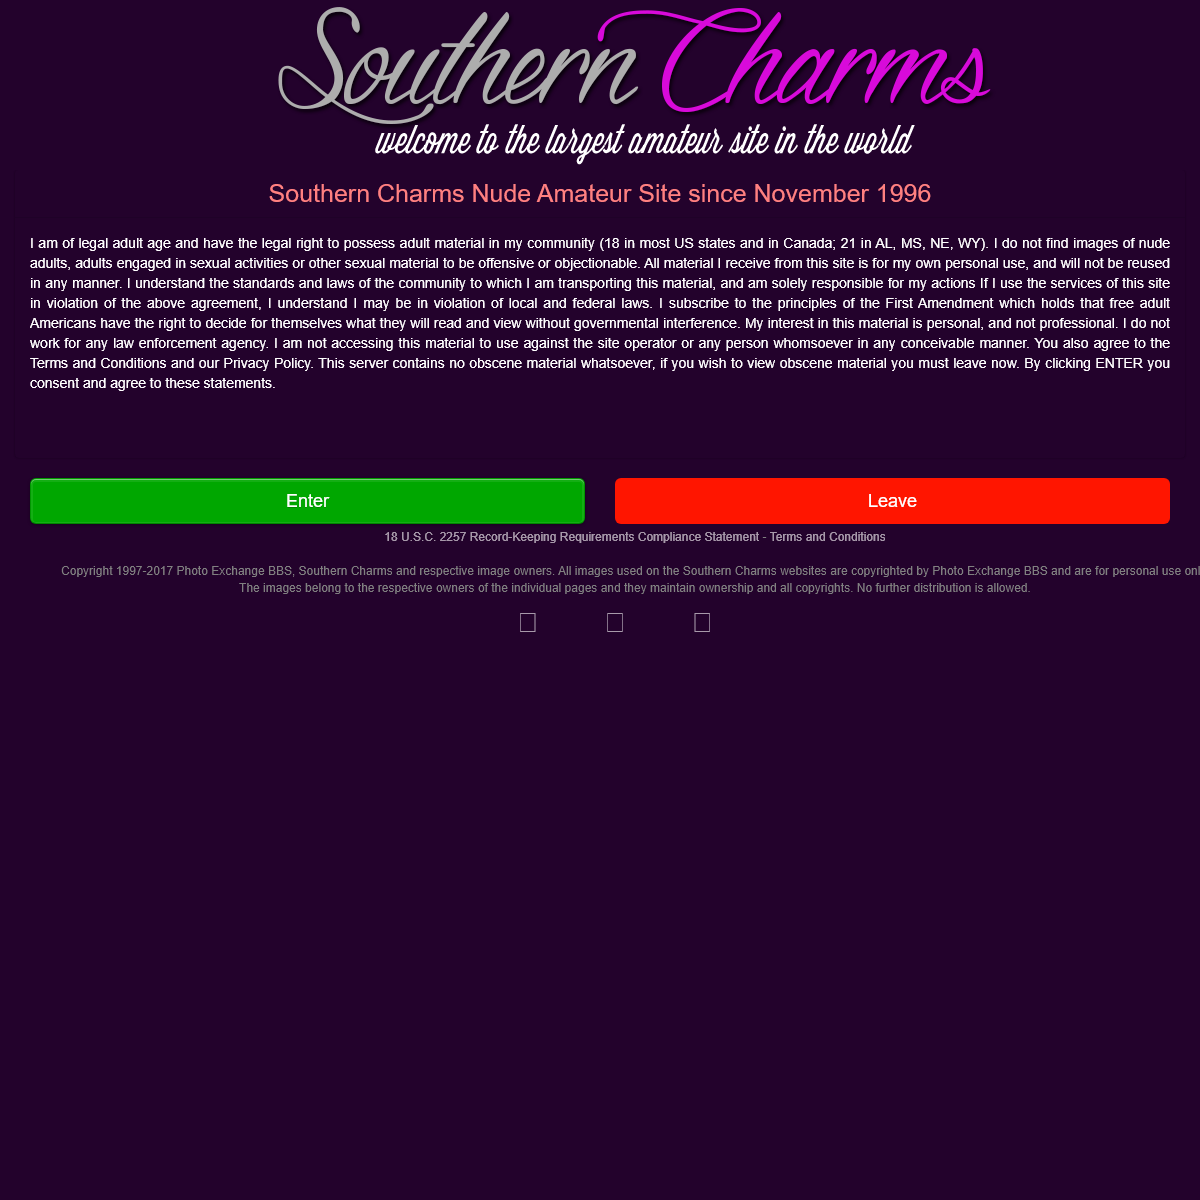 A complete backup of www.southern-charms4.com